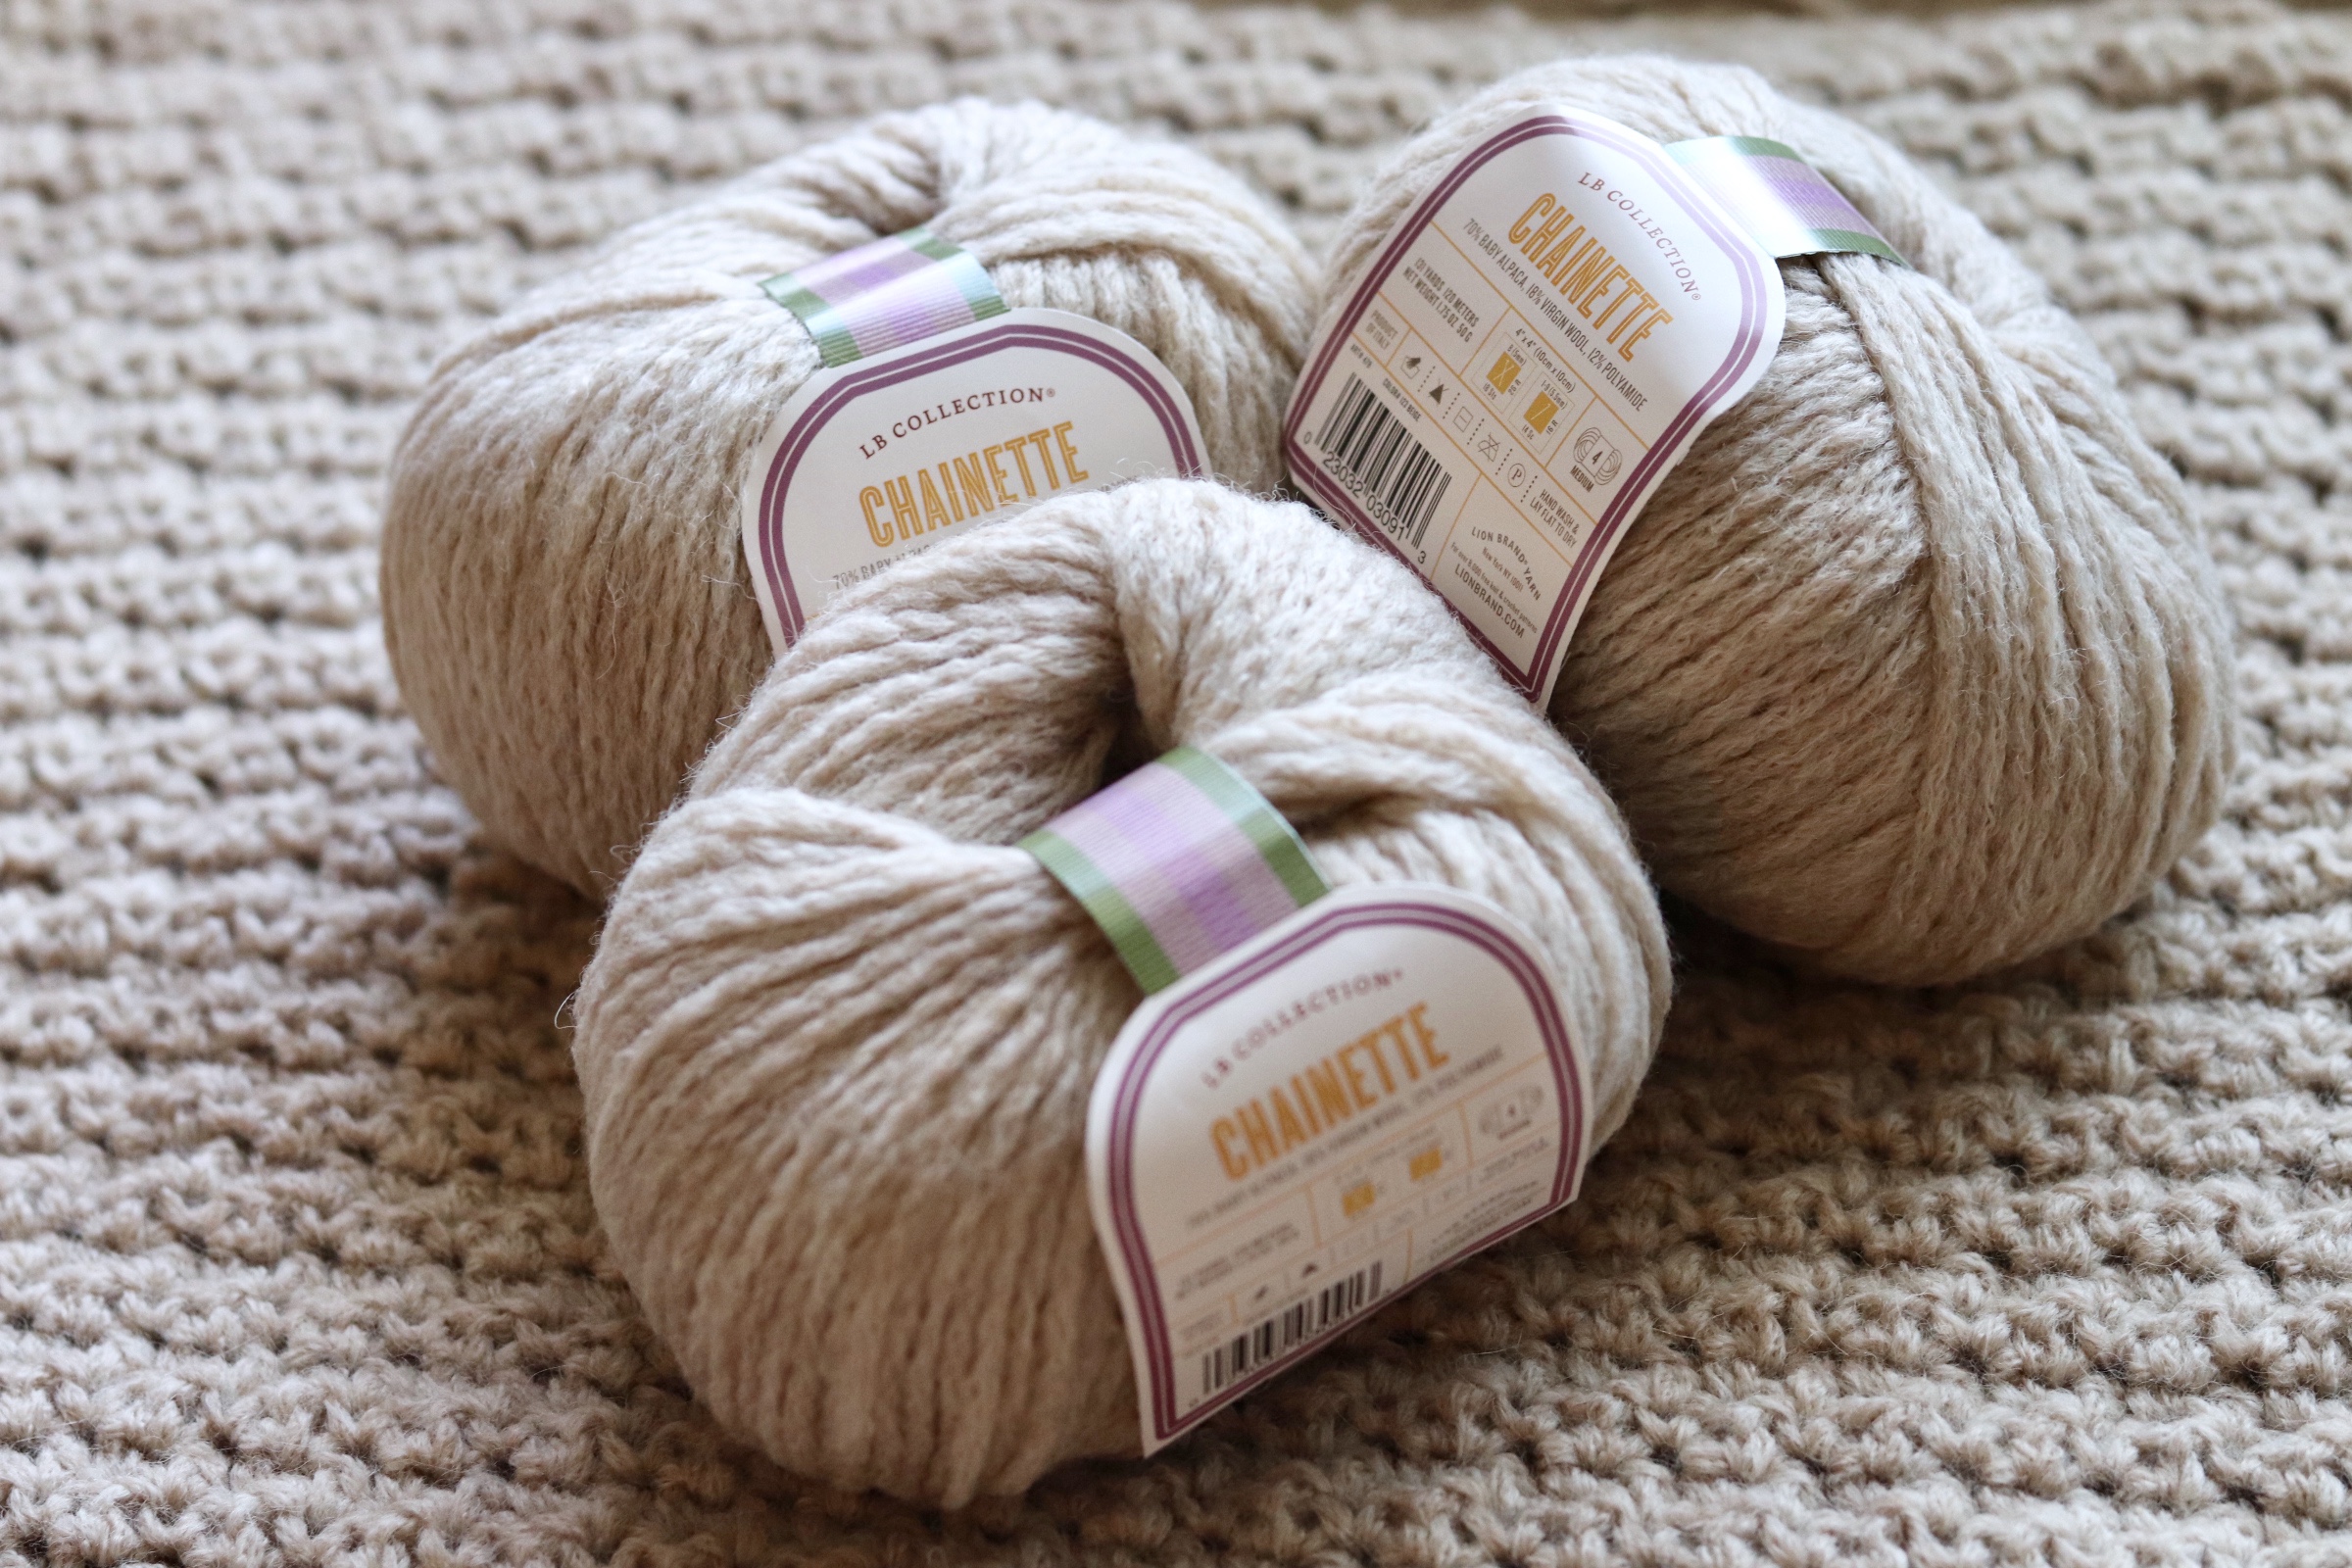 Olive Cover Story Chainette Yarn - Lion Brand